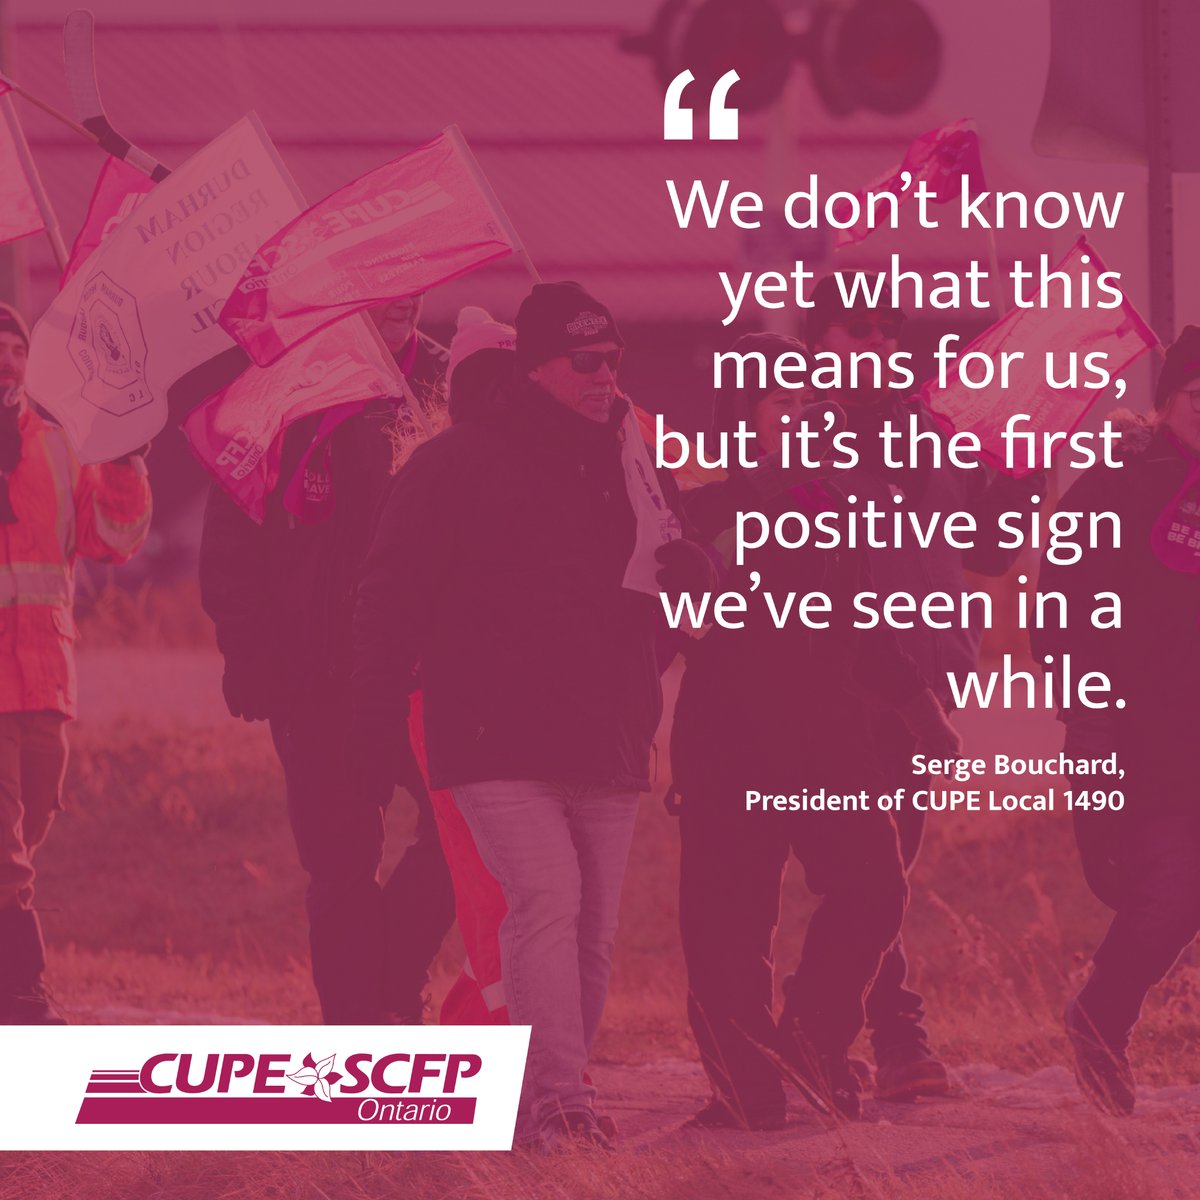 We welcome this move, but why did Minister Calandra wait so long to vacate a dysfunctional council? Especially one that’s kept workers from their jobs for 6+ months and deprived BRM residents of services. CUPE Ontario wrote to the Minister in April with this same ask and